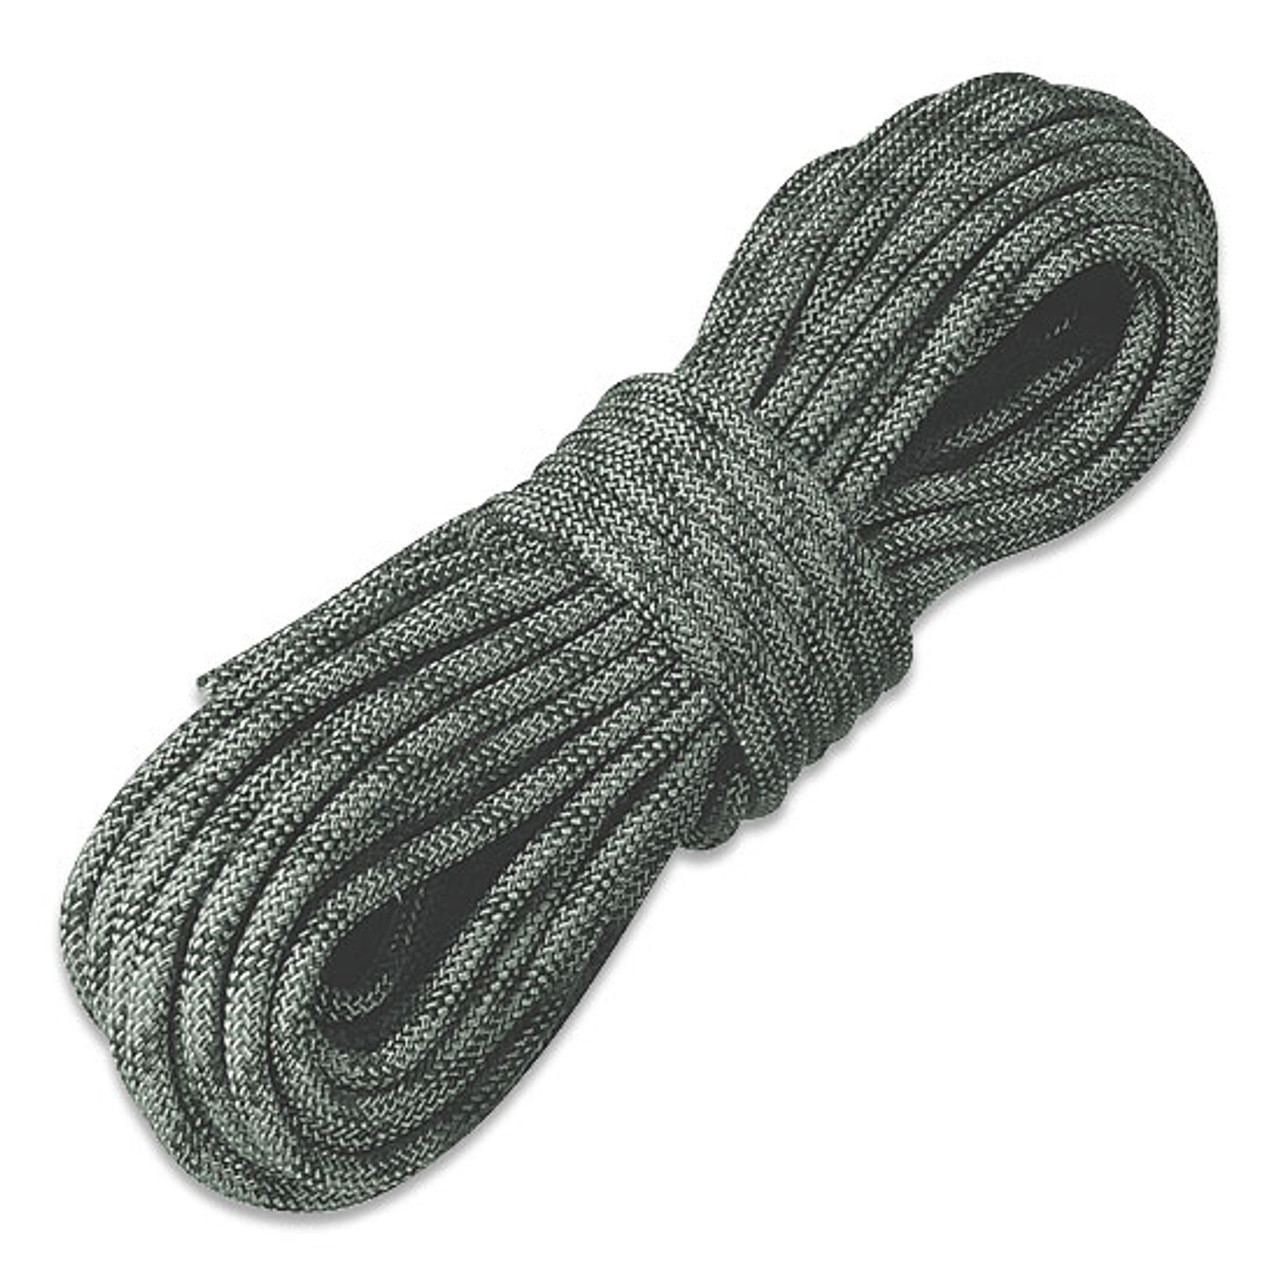 Kernmantle Rope 11.5mm x 100' Various Colors no selection [FC-ROPE